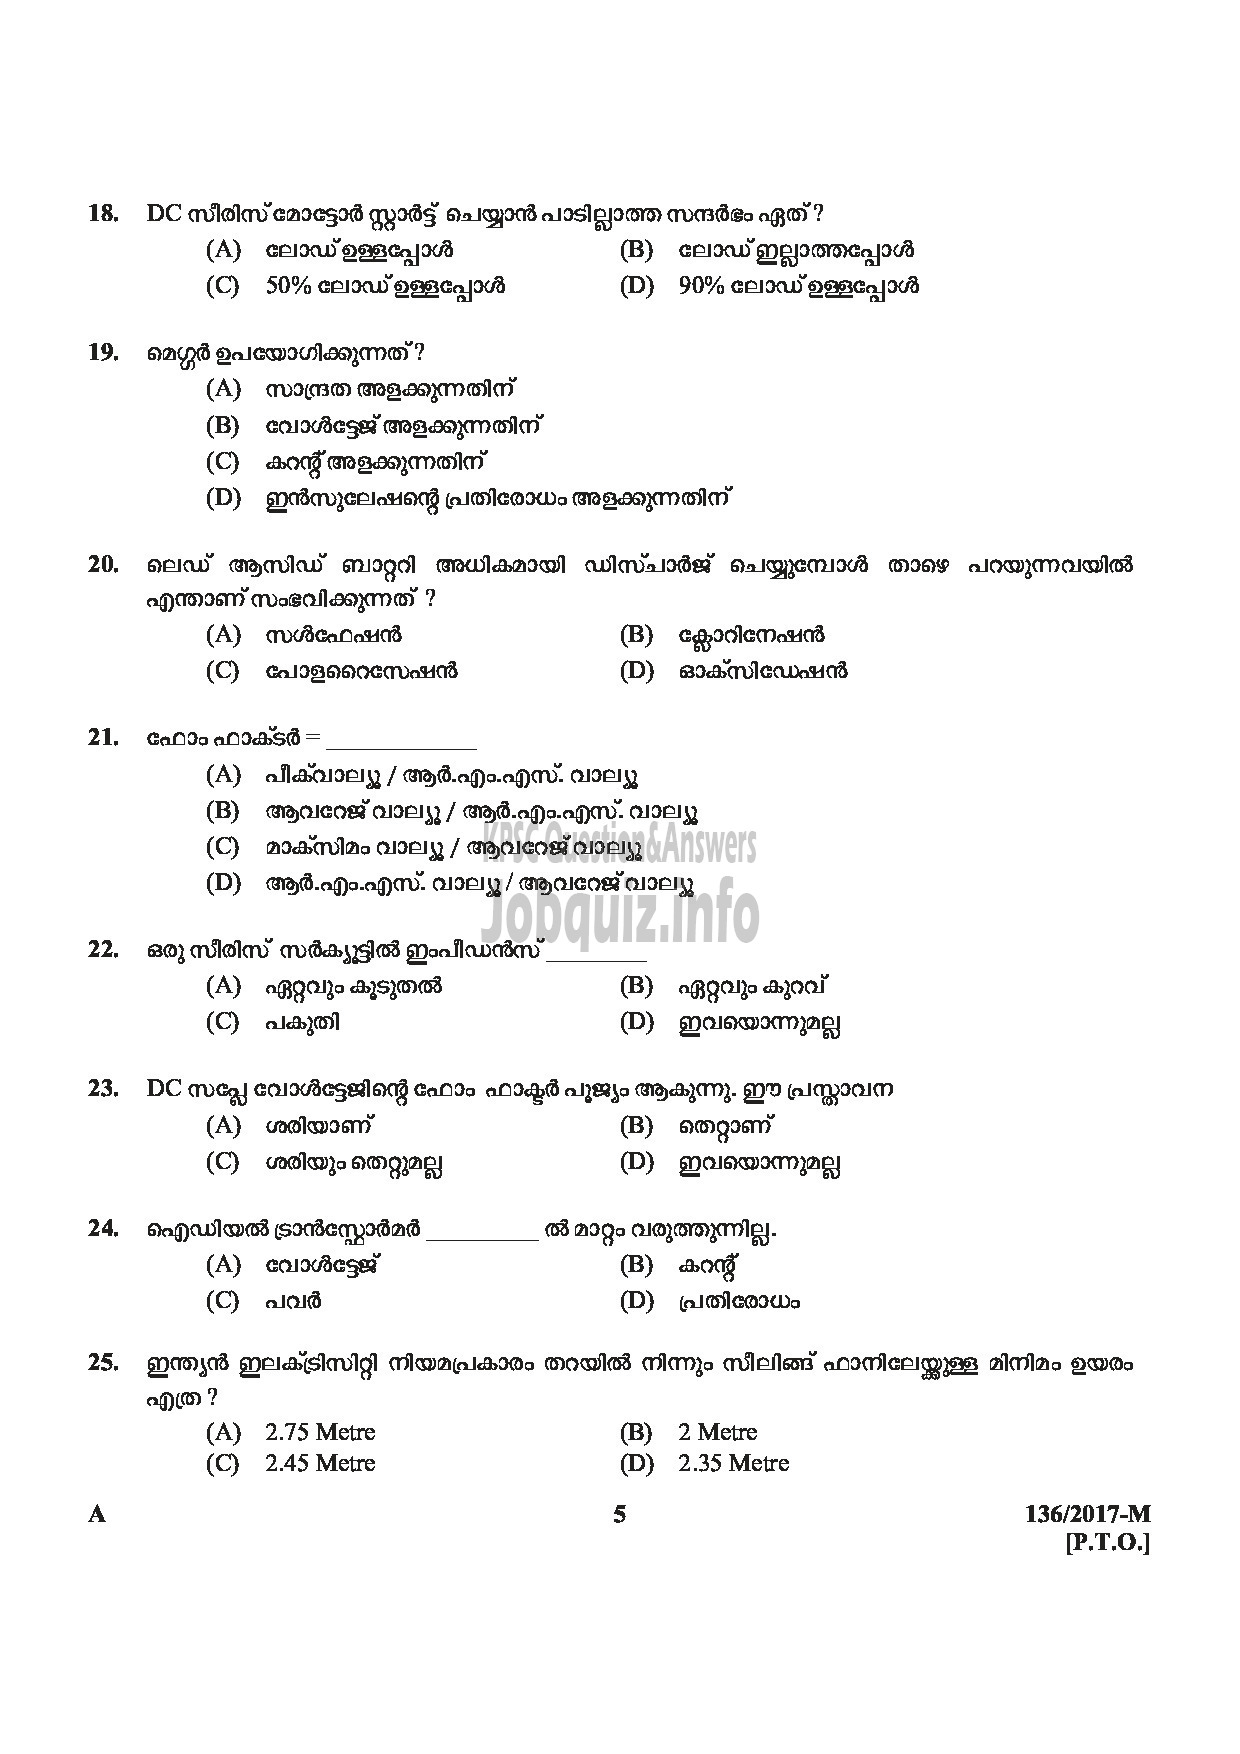 Kerala PSC Question Paper - METER READER/SPOT BILLER SPECIAL RECRUITMENT FROM AMONG ST ONLY MEDIUM OF QUESTION MALAYALAM-5